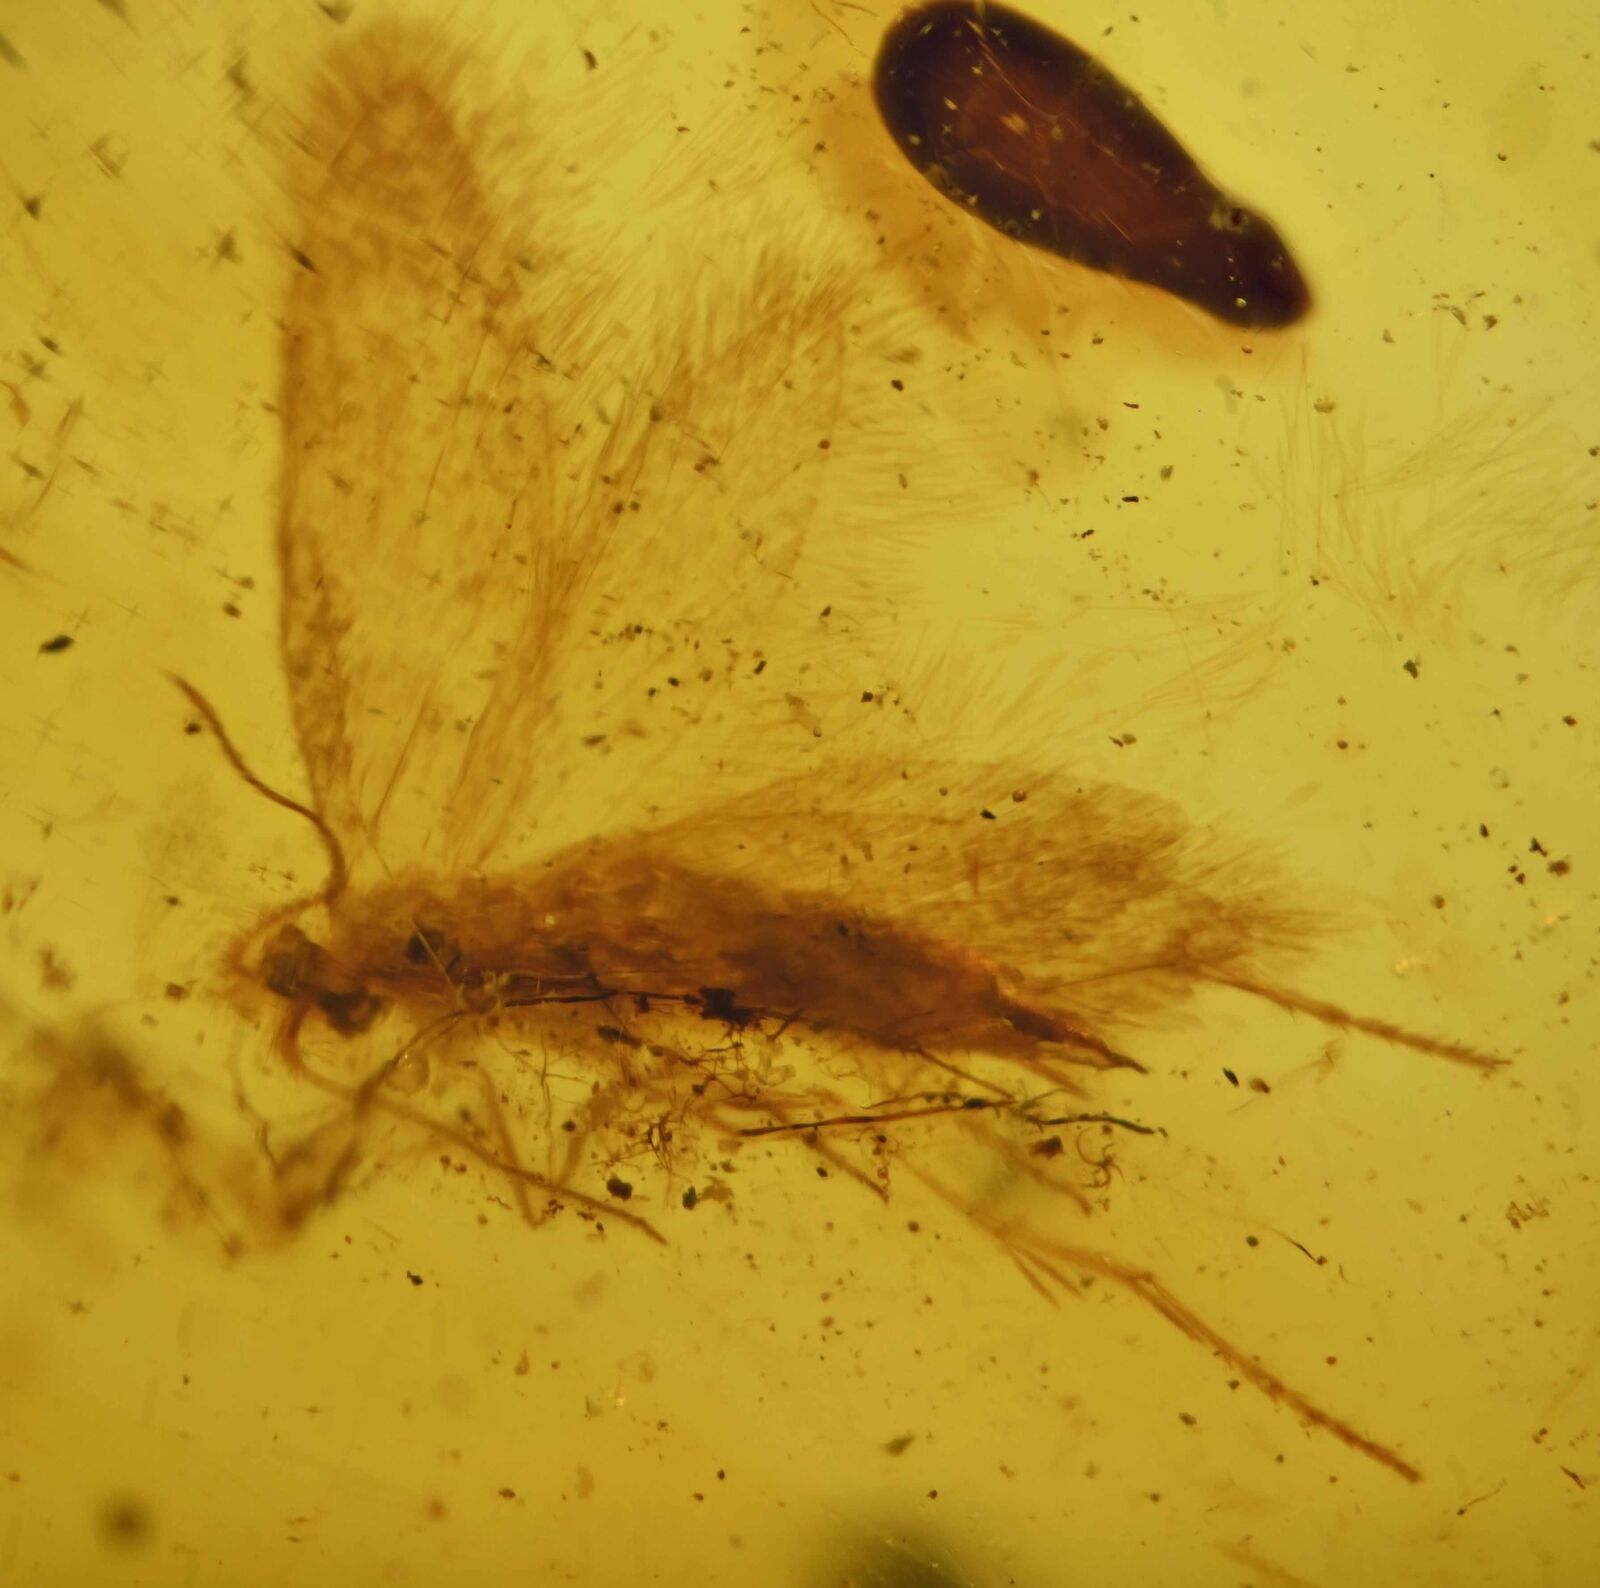 Detailed Trichoptera (Caddisfly), Fossil inclusion in Burmese Amber